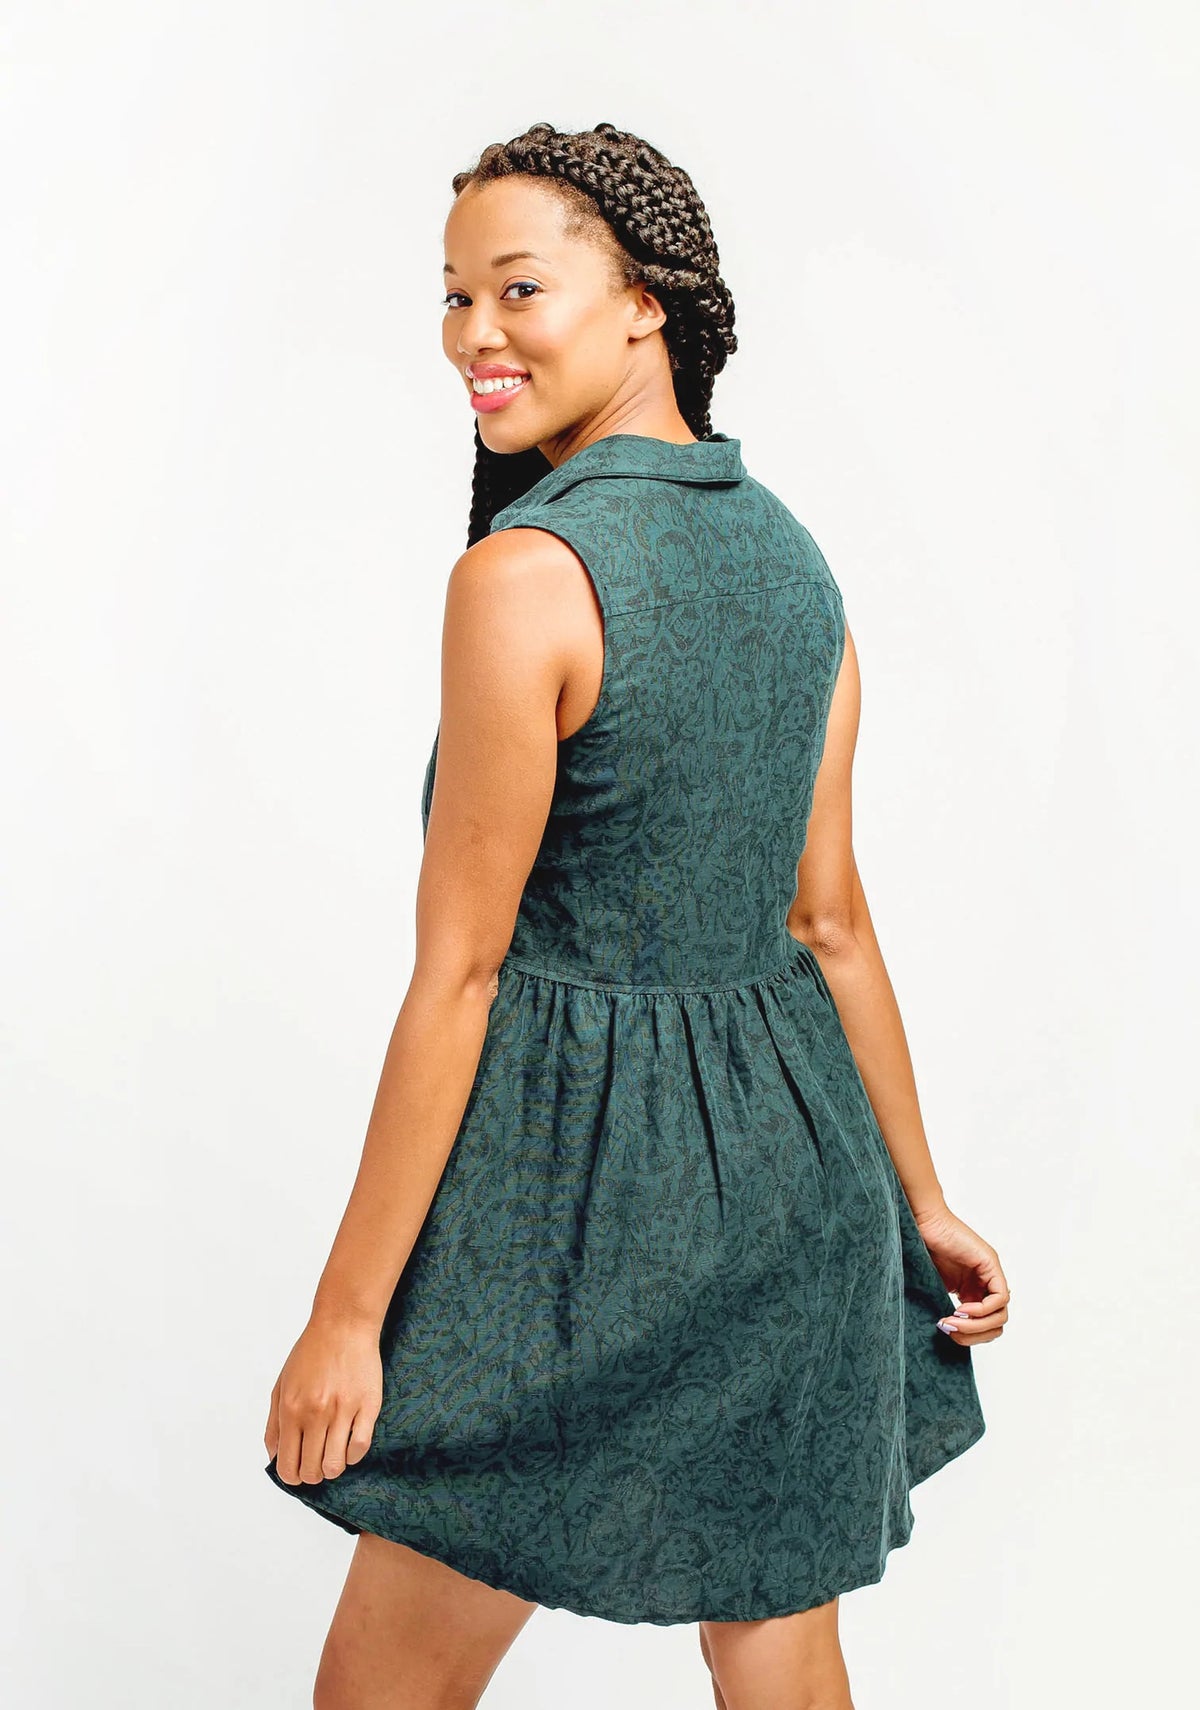 Model Lauren is wearing a size 8, view B Alder Shirtdress in a green patterned fabric. She is showing the back side of the shirtdress.